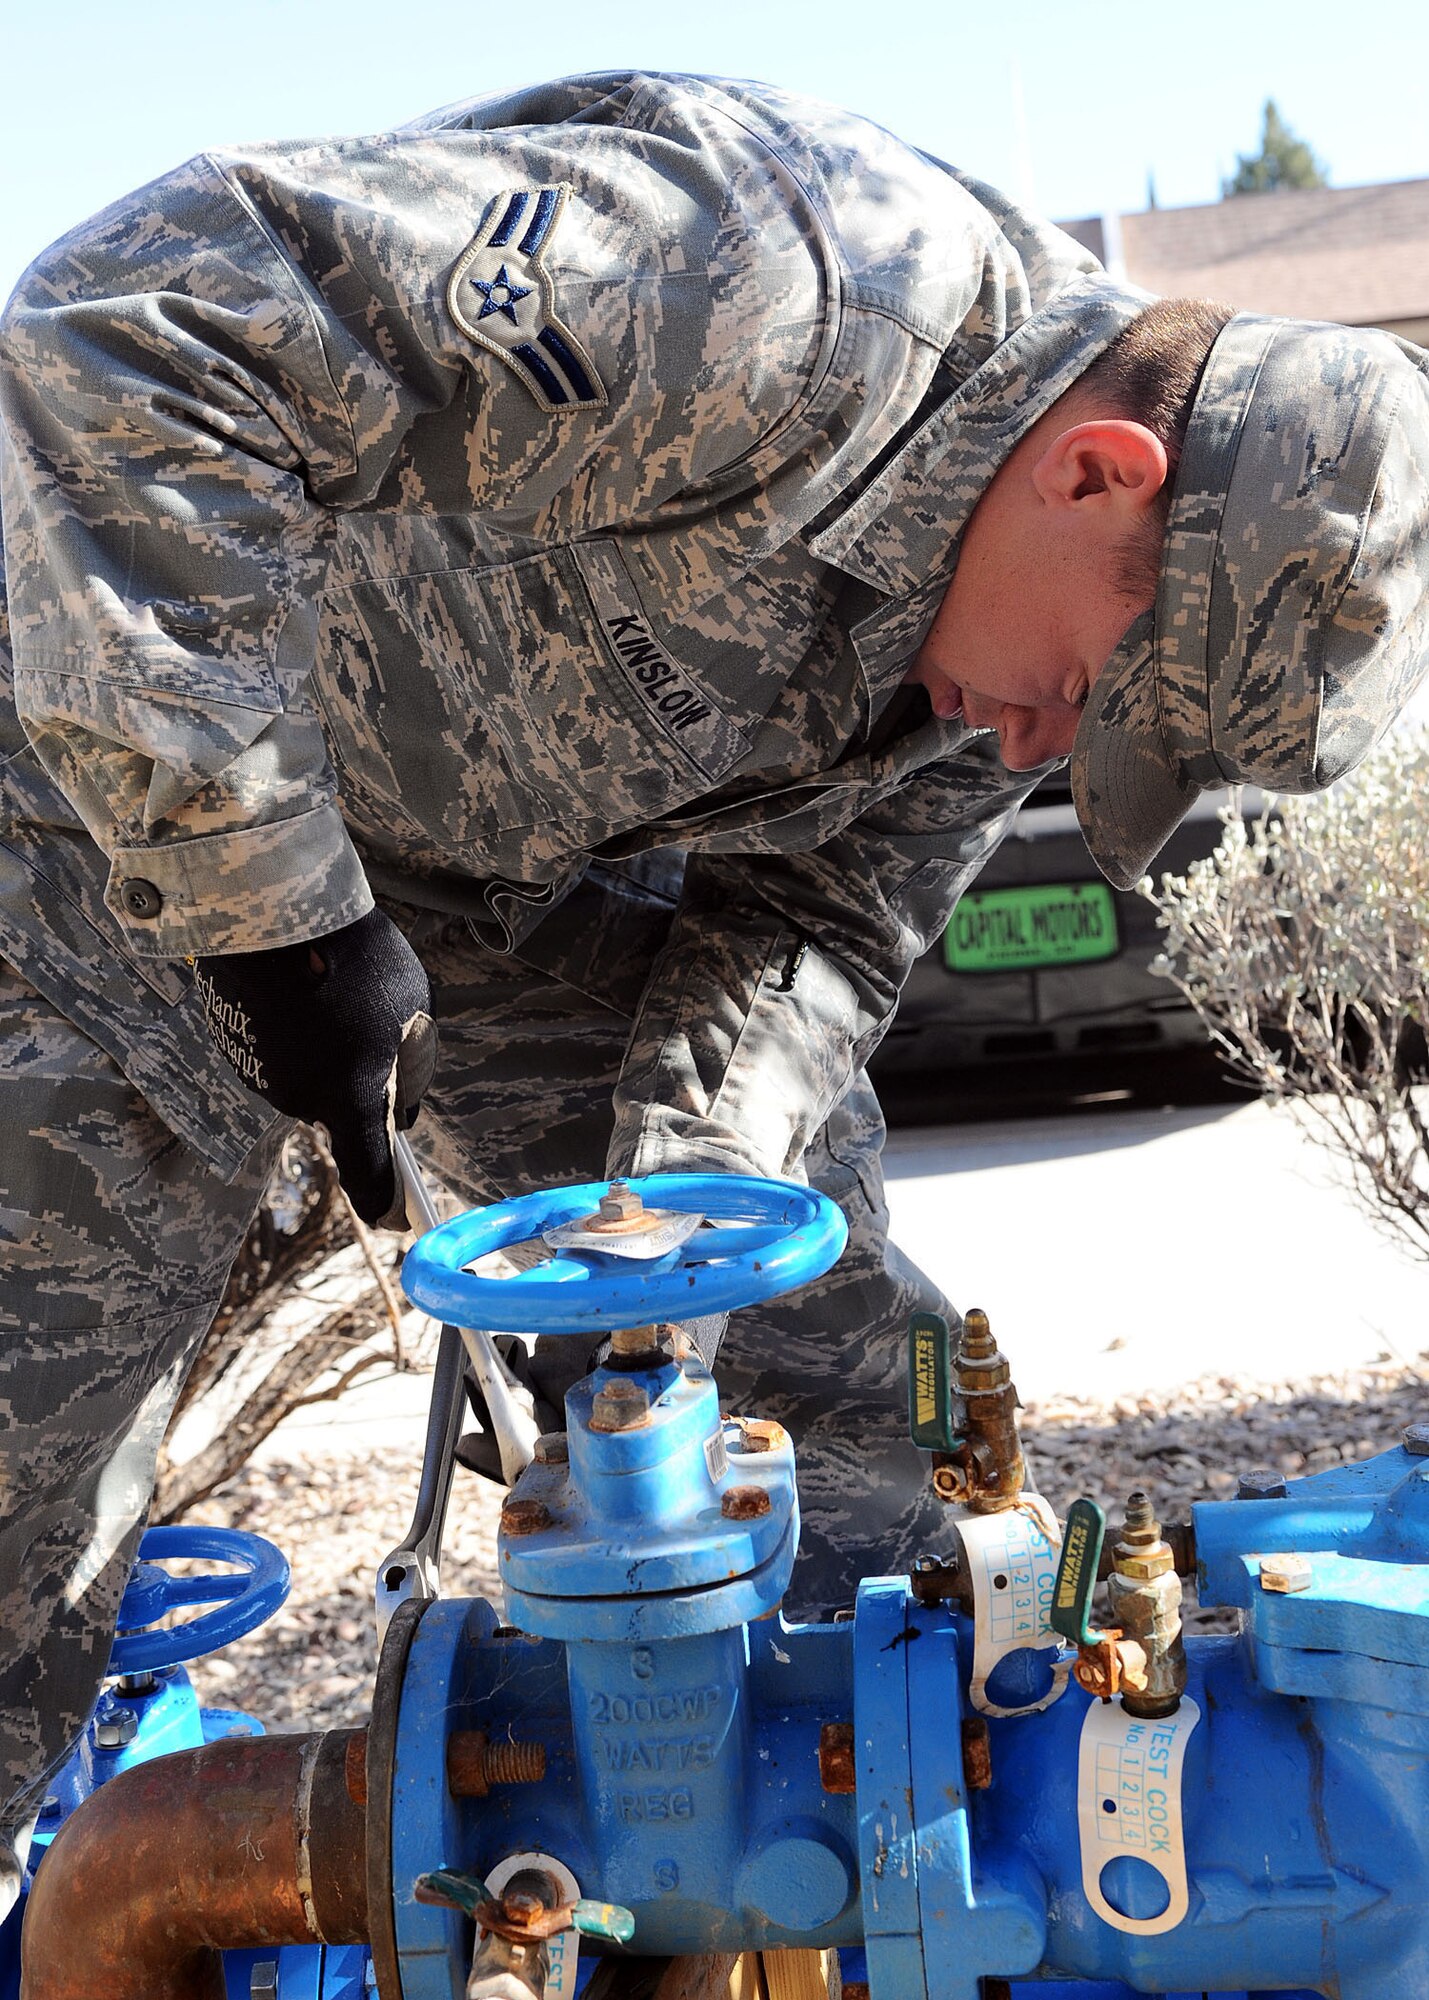 Airman 1st Class Jake Kinslow, 49th Civil Engineer Squadron, repairs a water main outside of building 224 at Holloman Air Force Base, N.M., Feb. 6. Airman Kinslow worked diligently to fix the problem. (U.S Air Force photo/ Airman 1st Class DeAndre Curtiss)